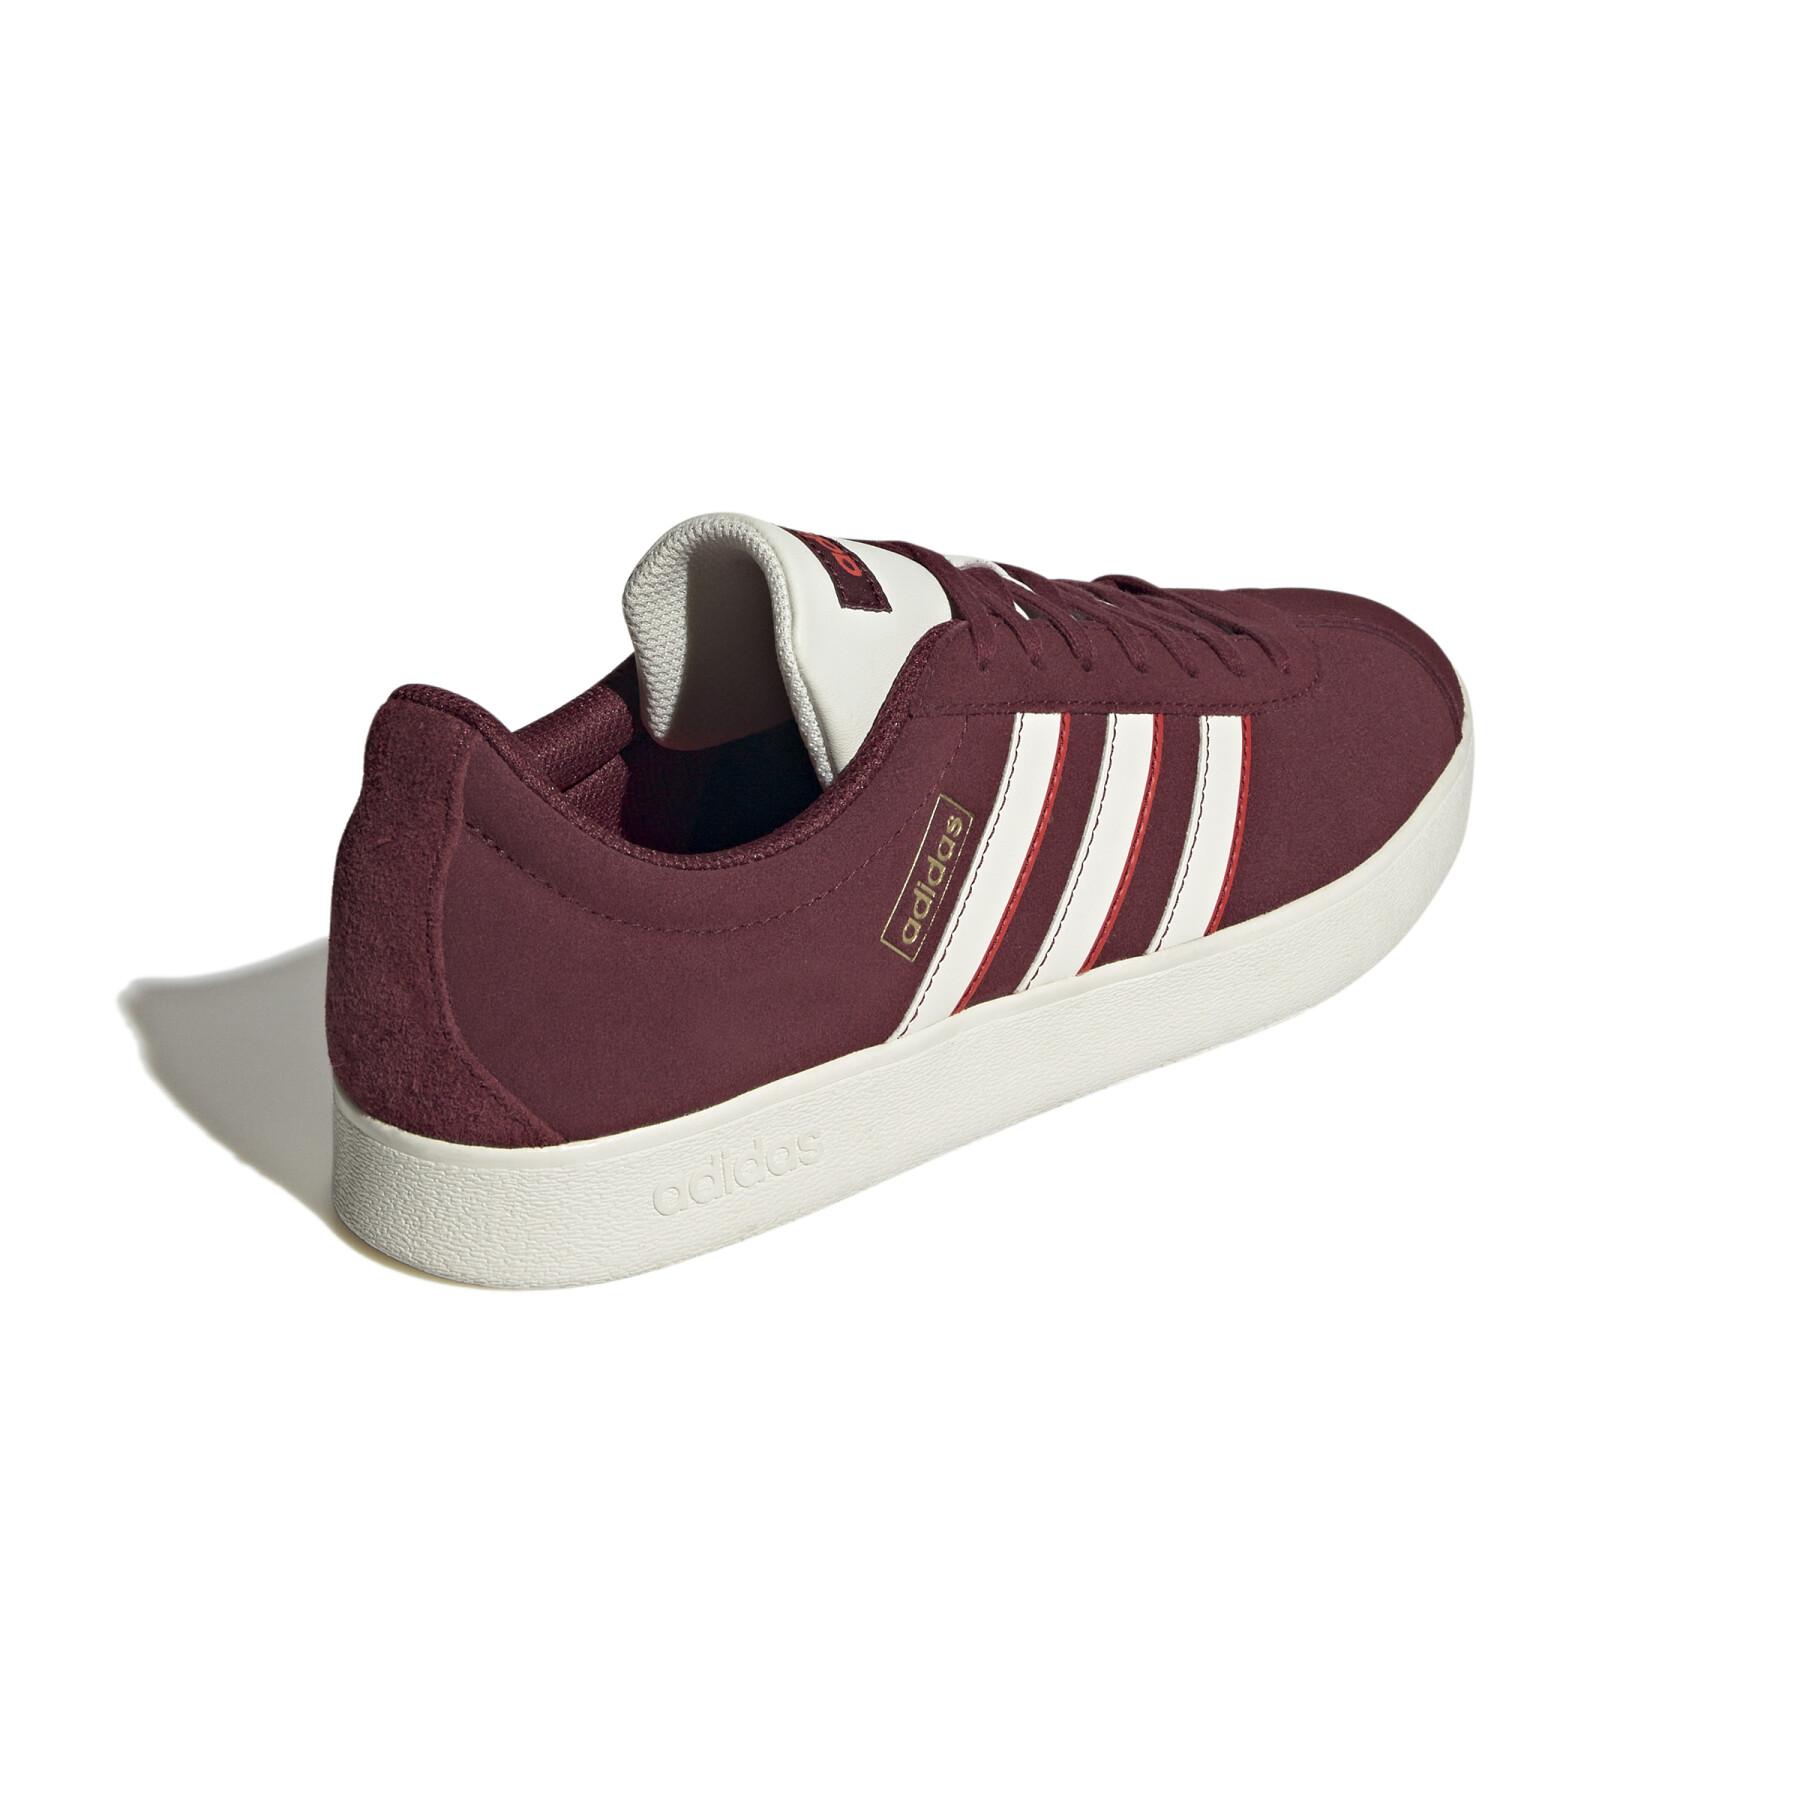 Trainers adidas VL Court 2.0